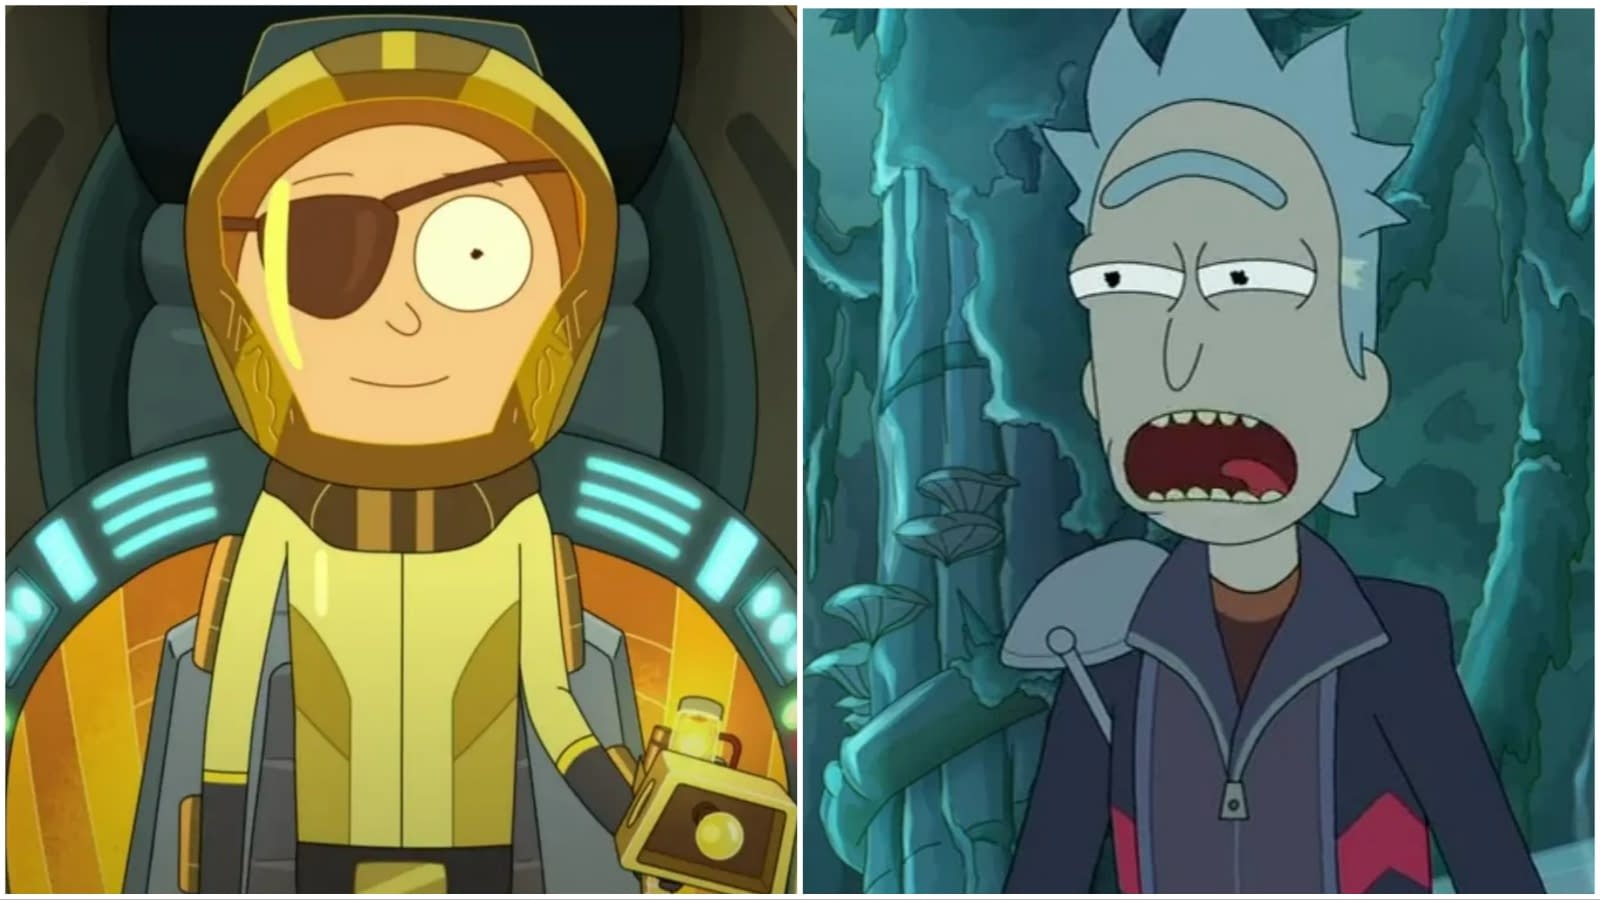 You Can Watch Rick and Morty's Anime Halloween Special Here